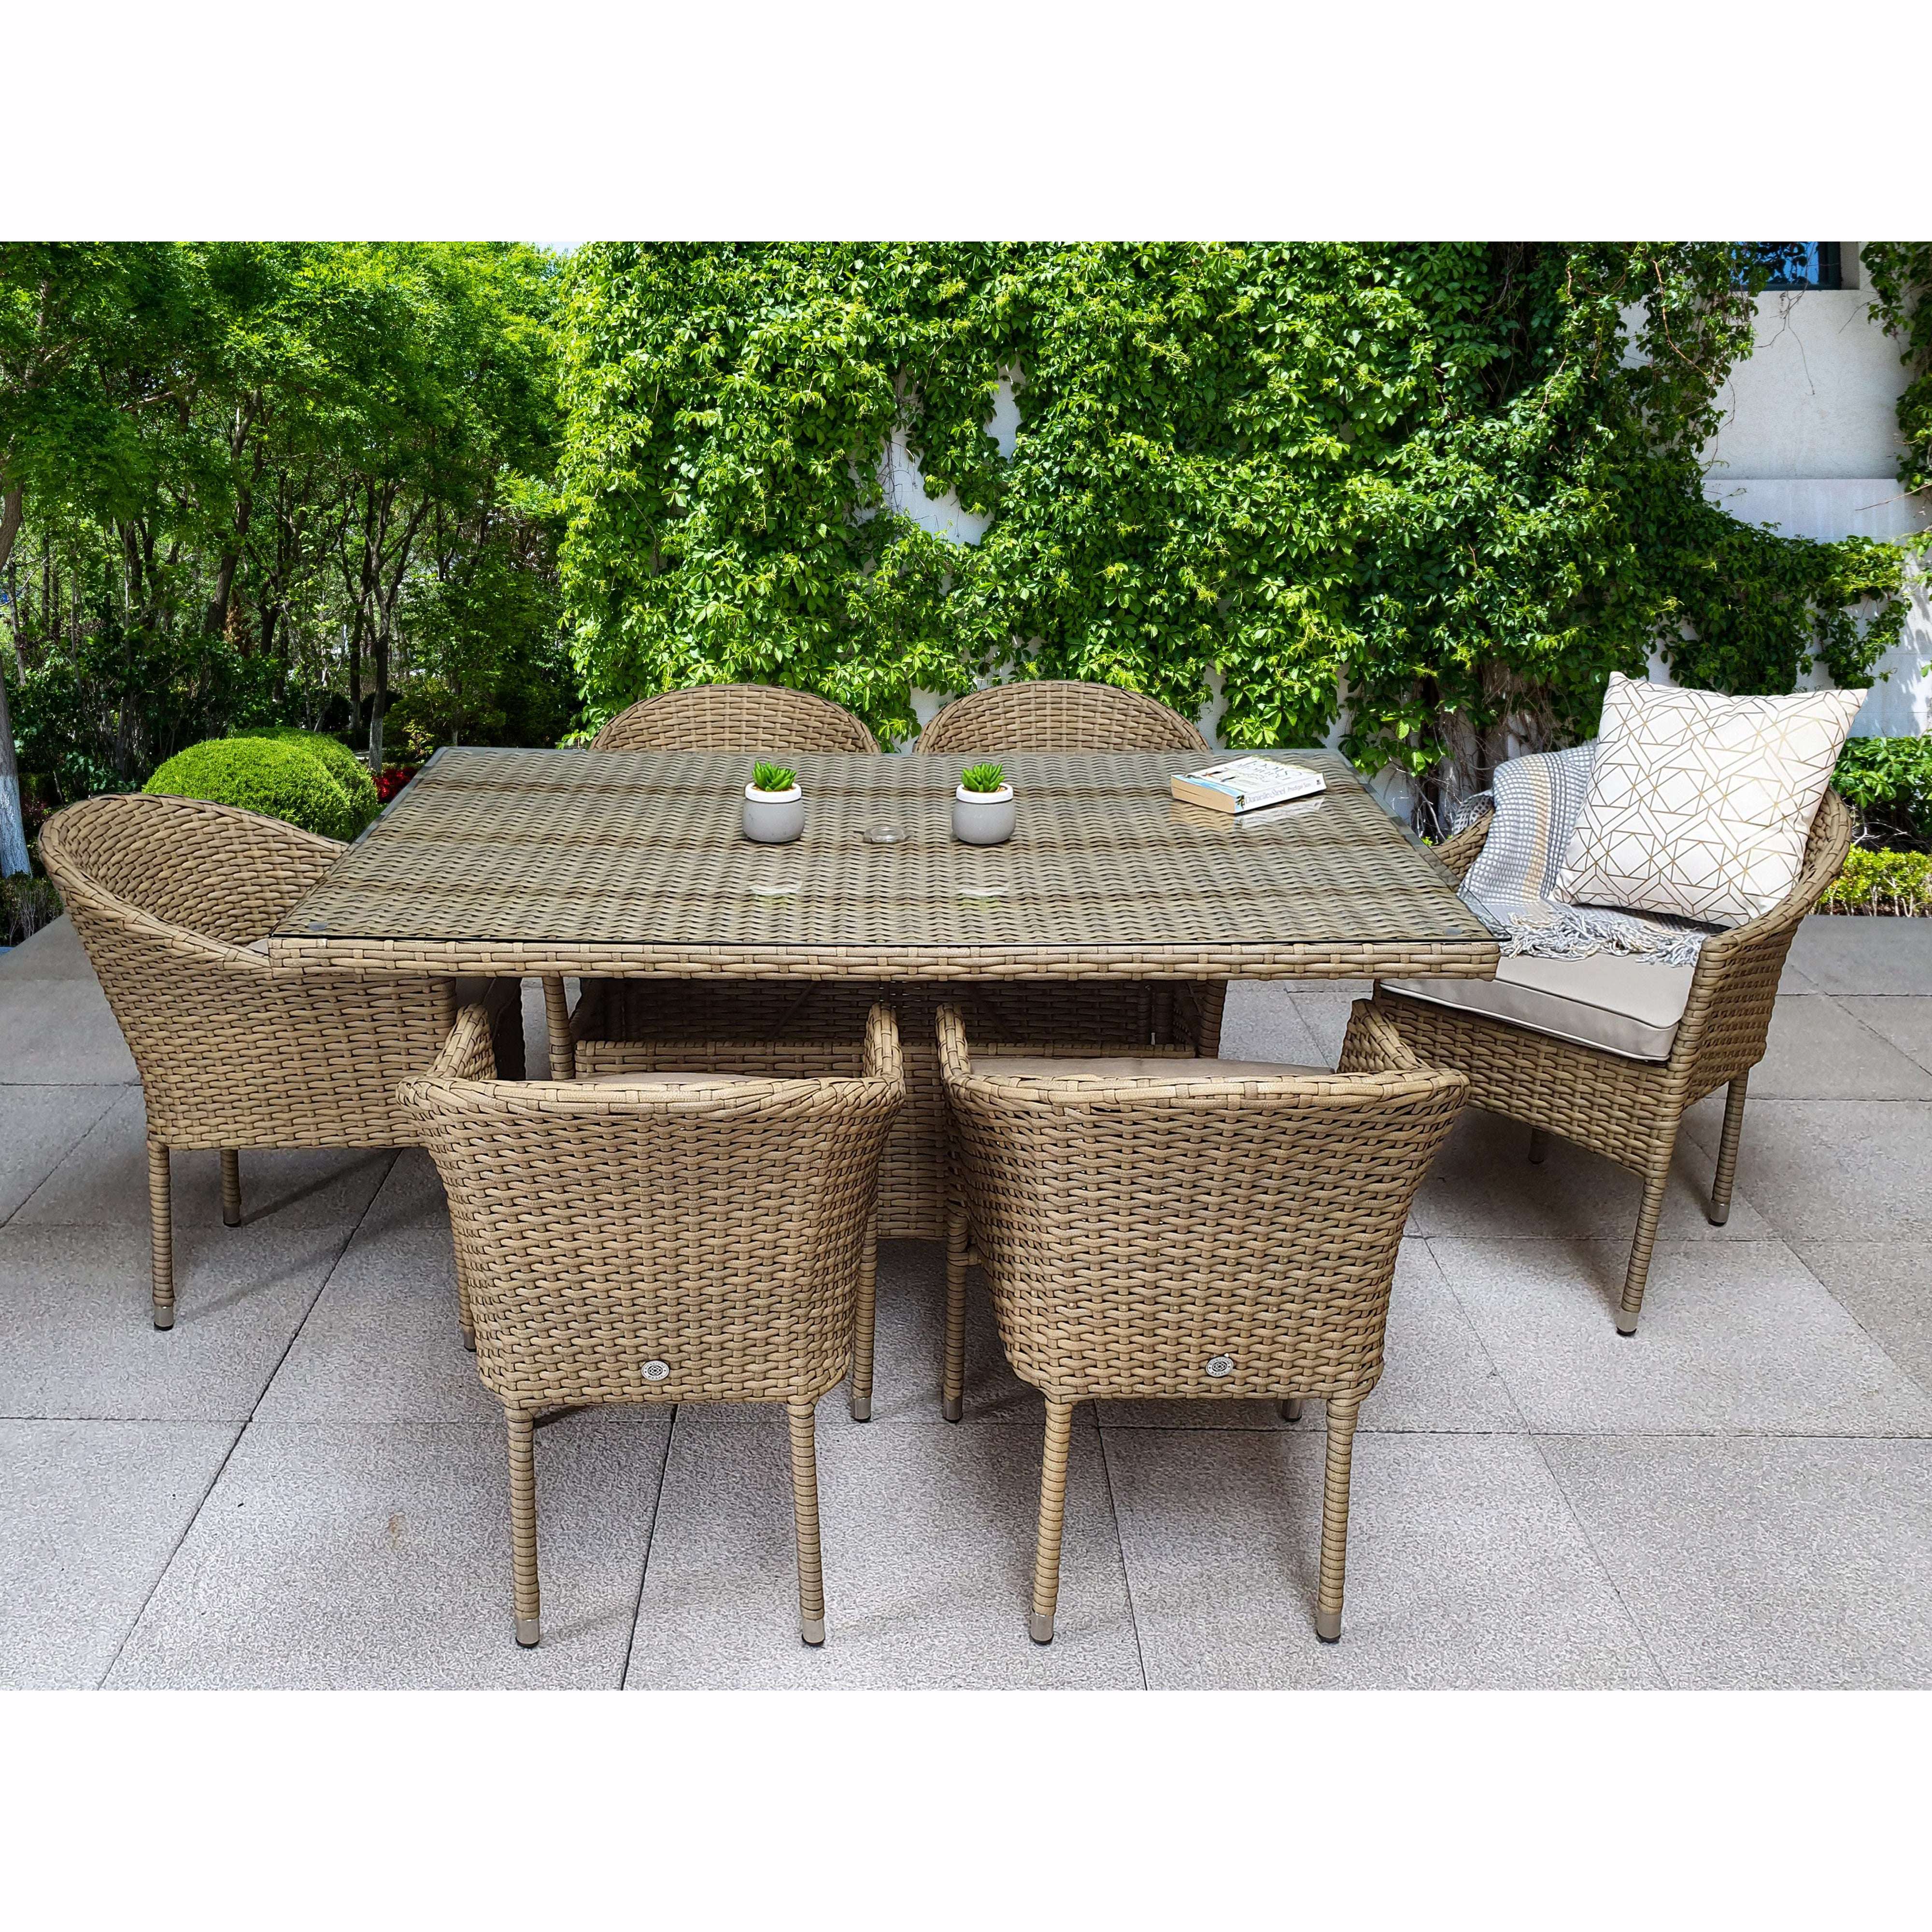 Exceptional Garden:Signature Weave Darcey 6-Seater Dining Set with Rectangular Table and Stacking Chairs